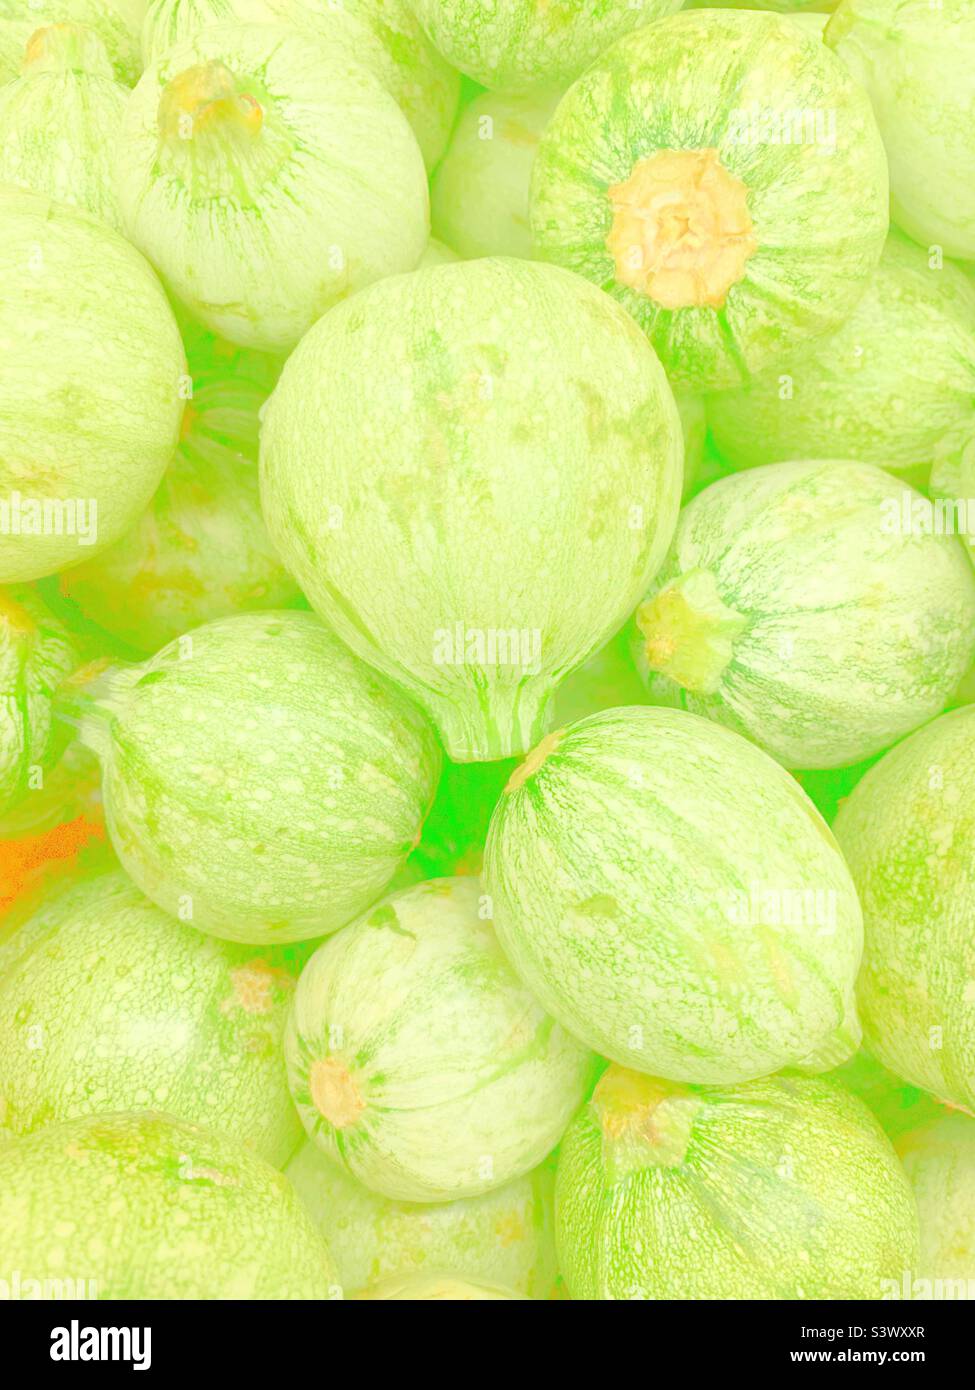 Faded photograph of round Mexican zucchini for sale at the garden fresh produce market. Stock Photo